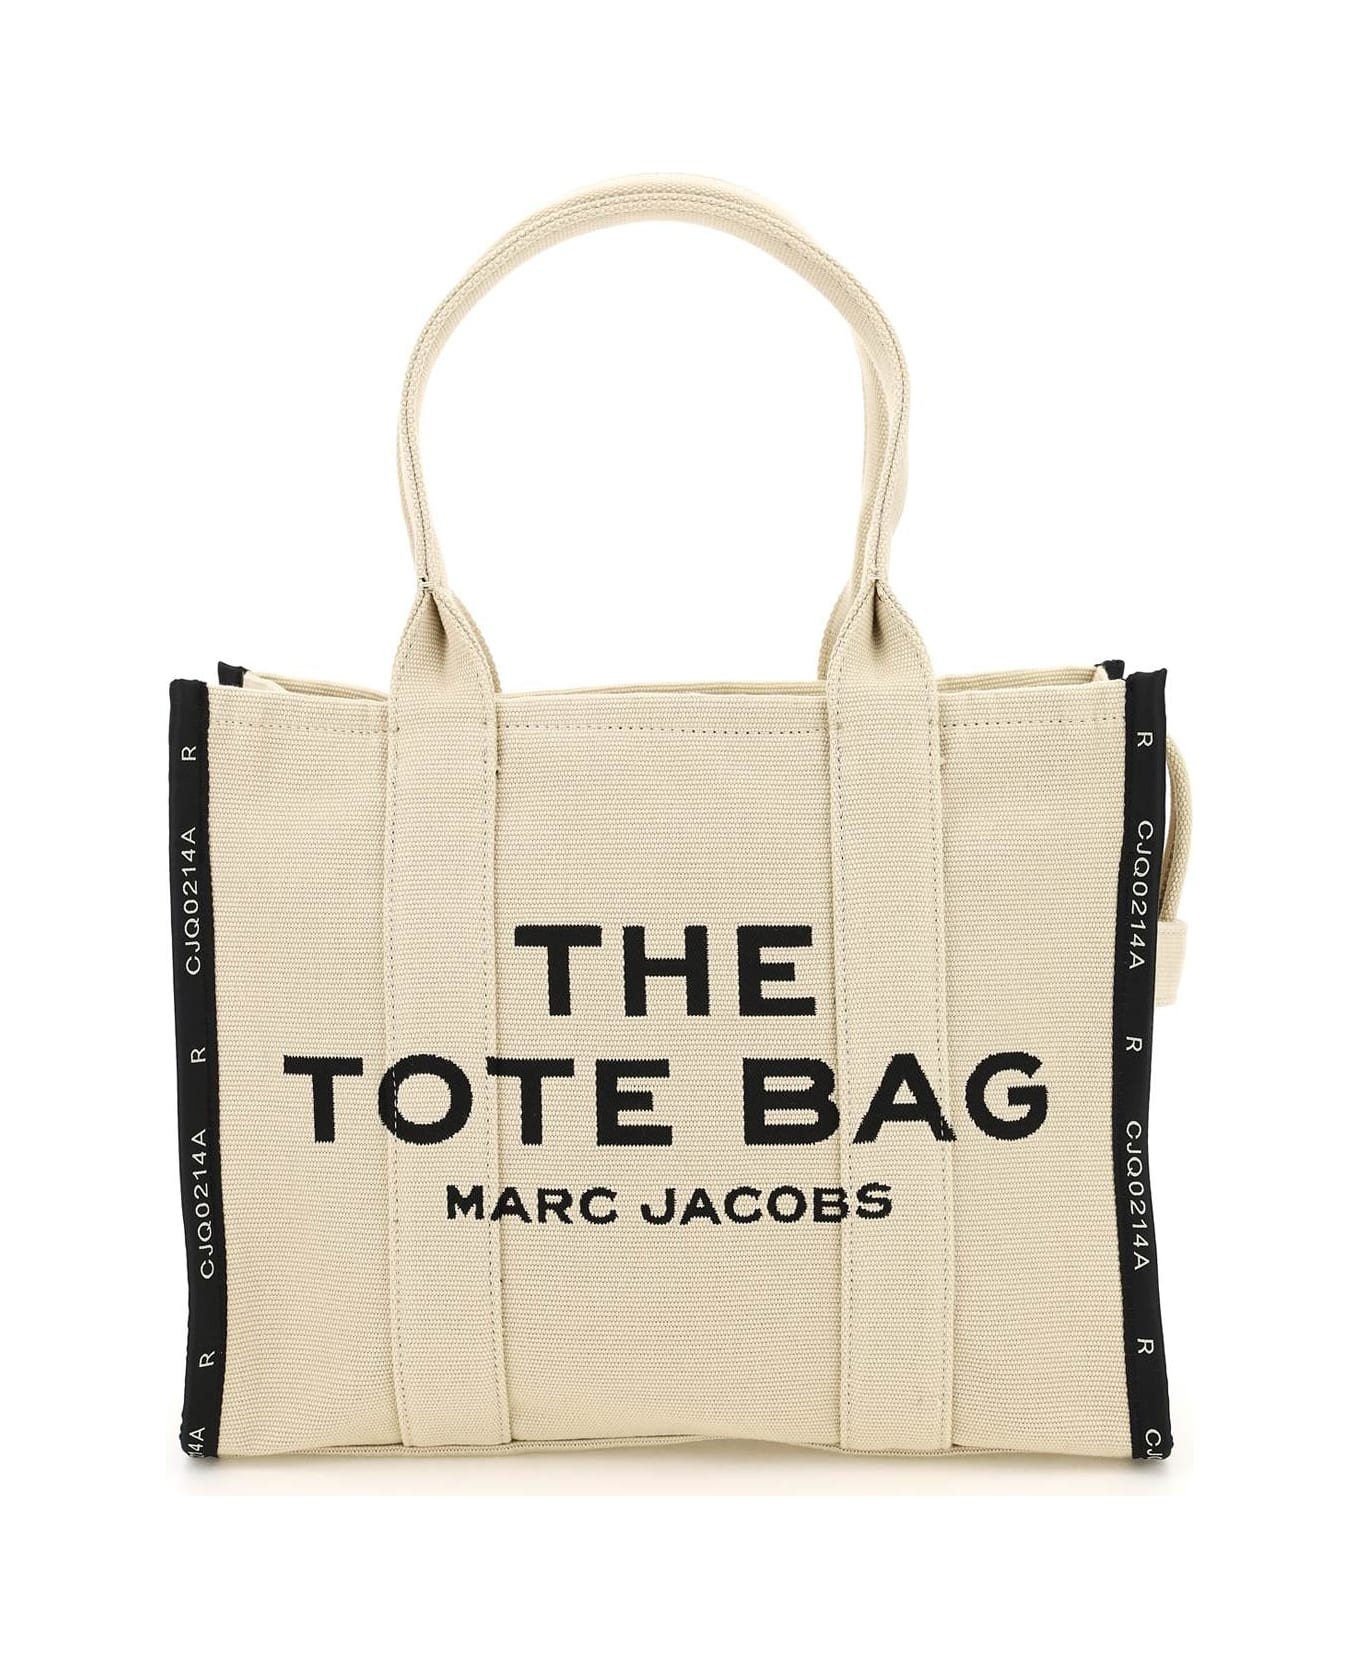 Marc Jacobs The Jacquard Traveler Tote Bag Large - Warm sand トートバッグ